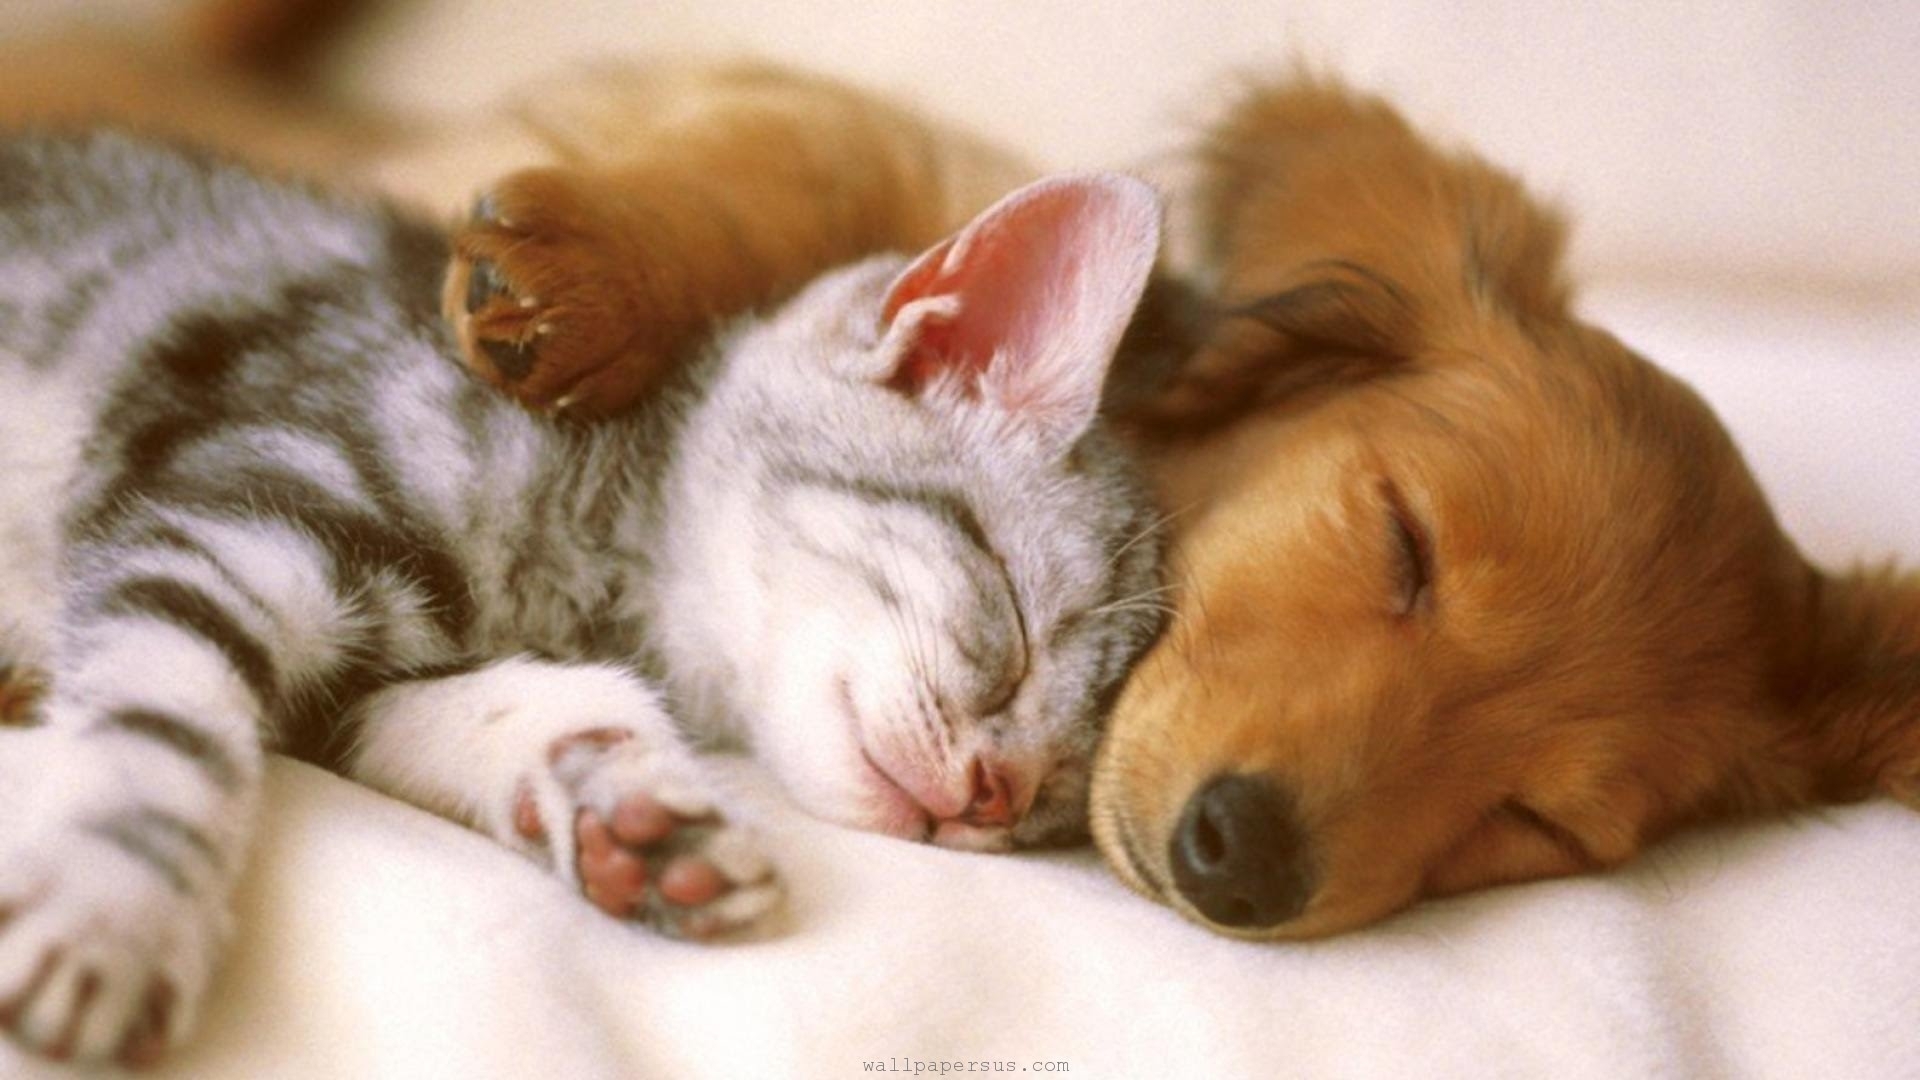 10 New Cute Kitten And Puppy Pictures FULL HD 1080p For PC Desktop